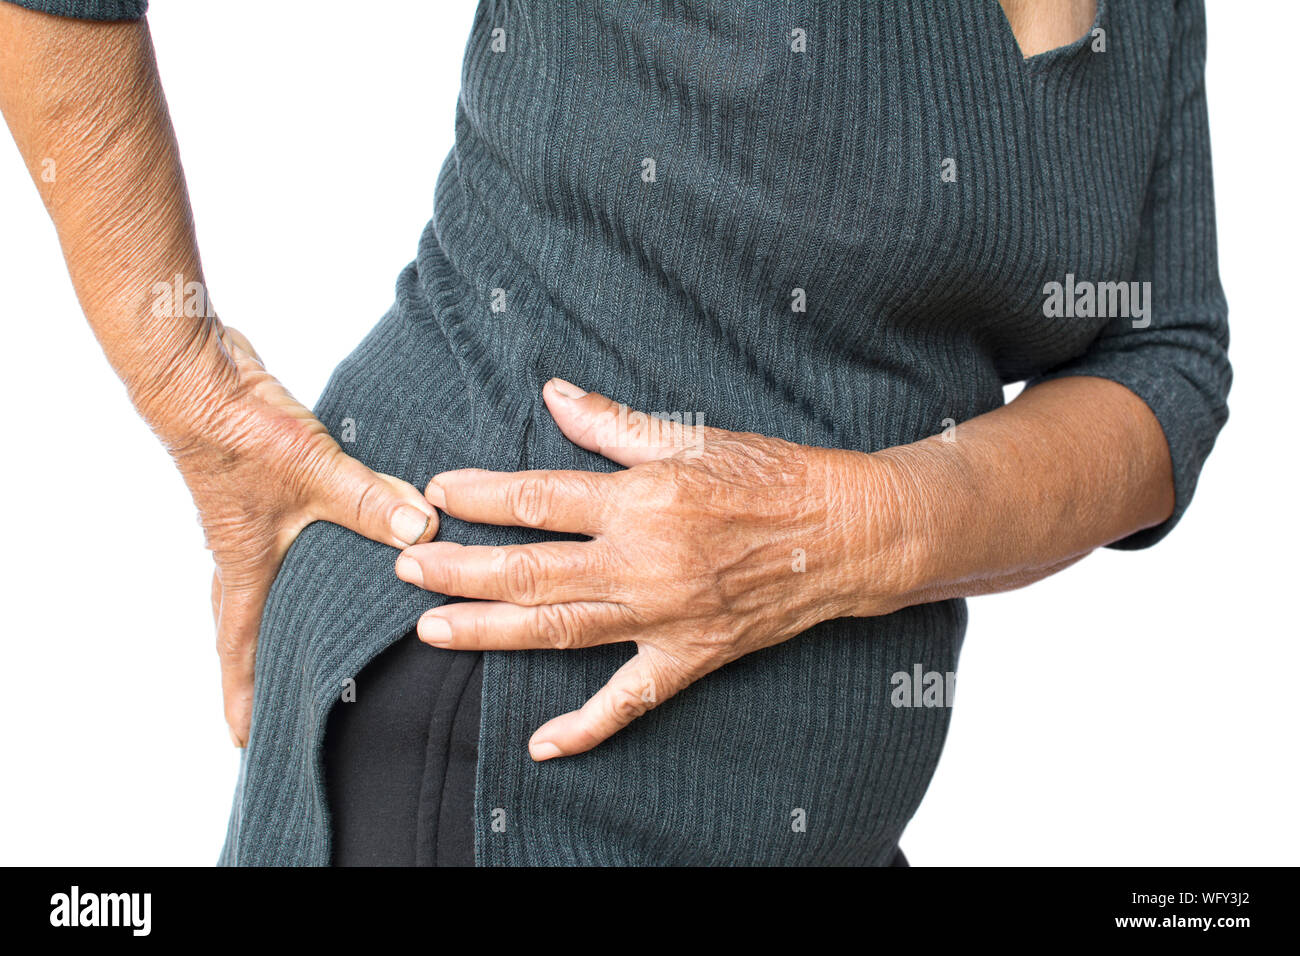 Midsection Of Senior Woman Suffering From Pain Against White Background Stock Photo